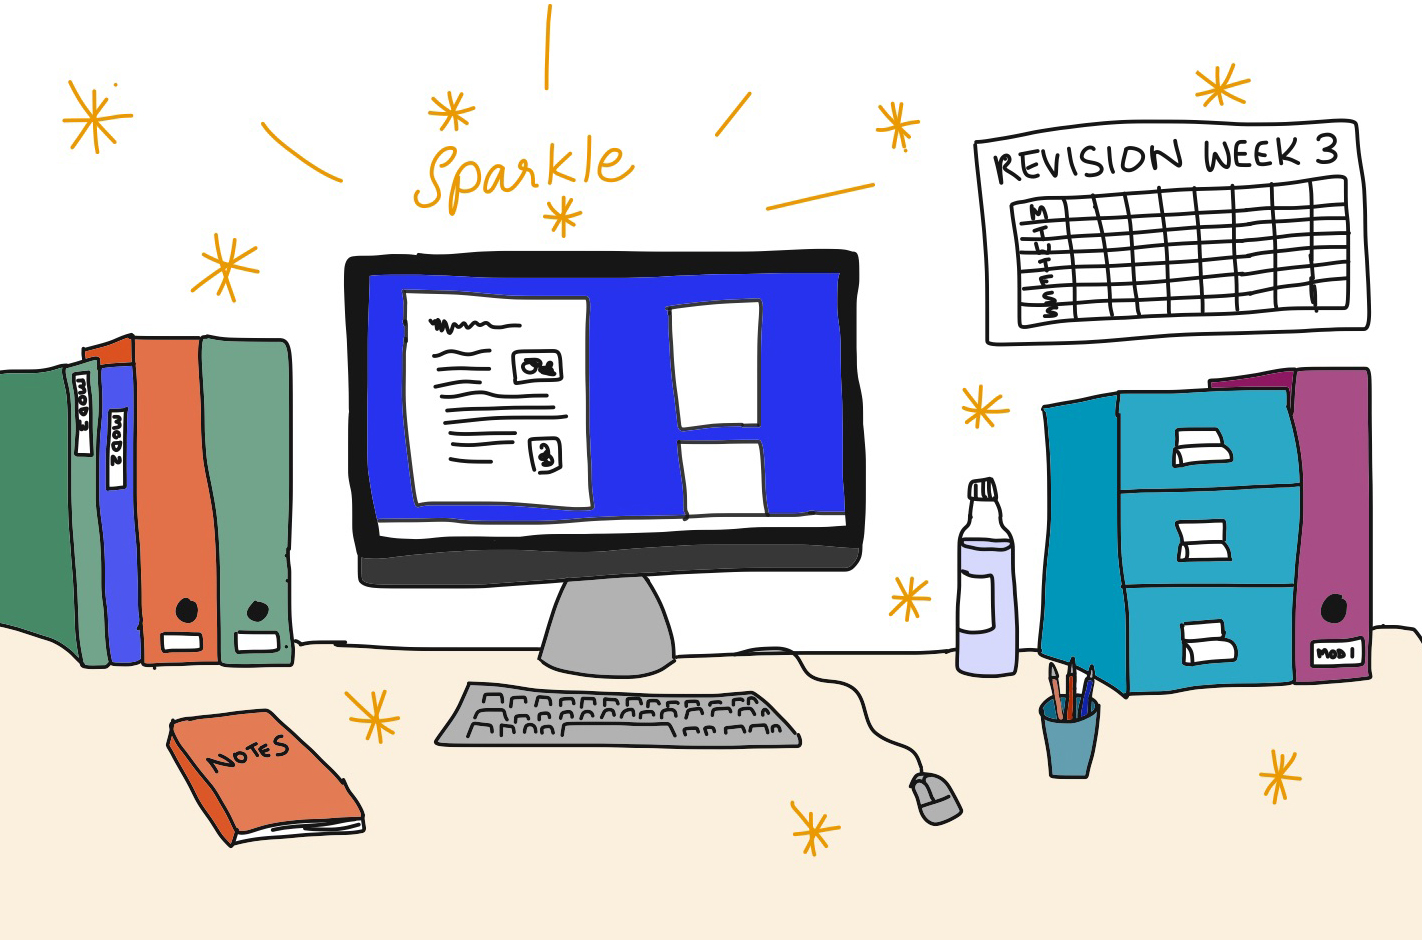 A sparkling desktop, computer and organised files